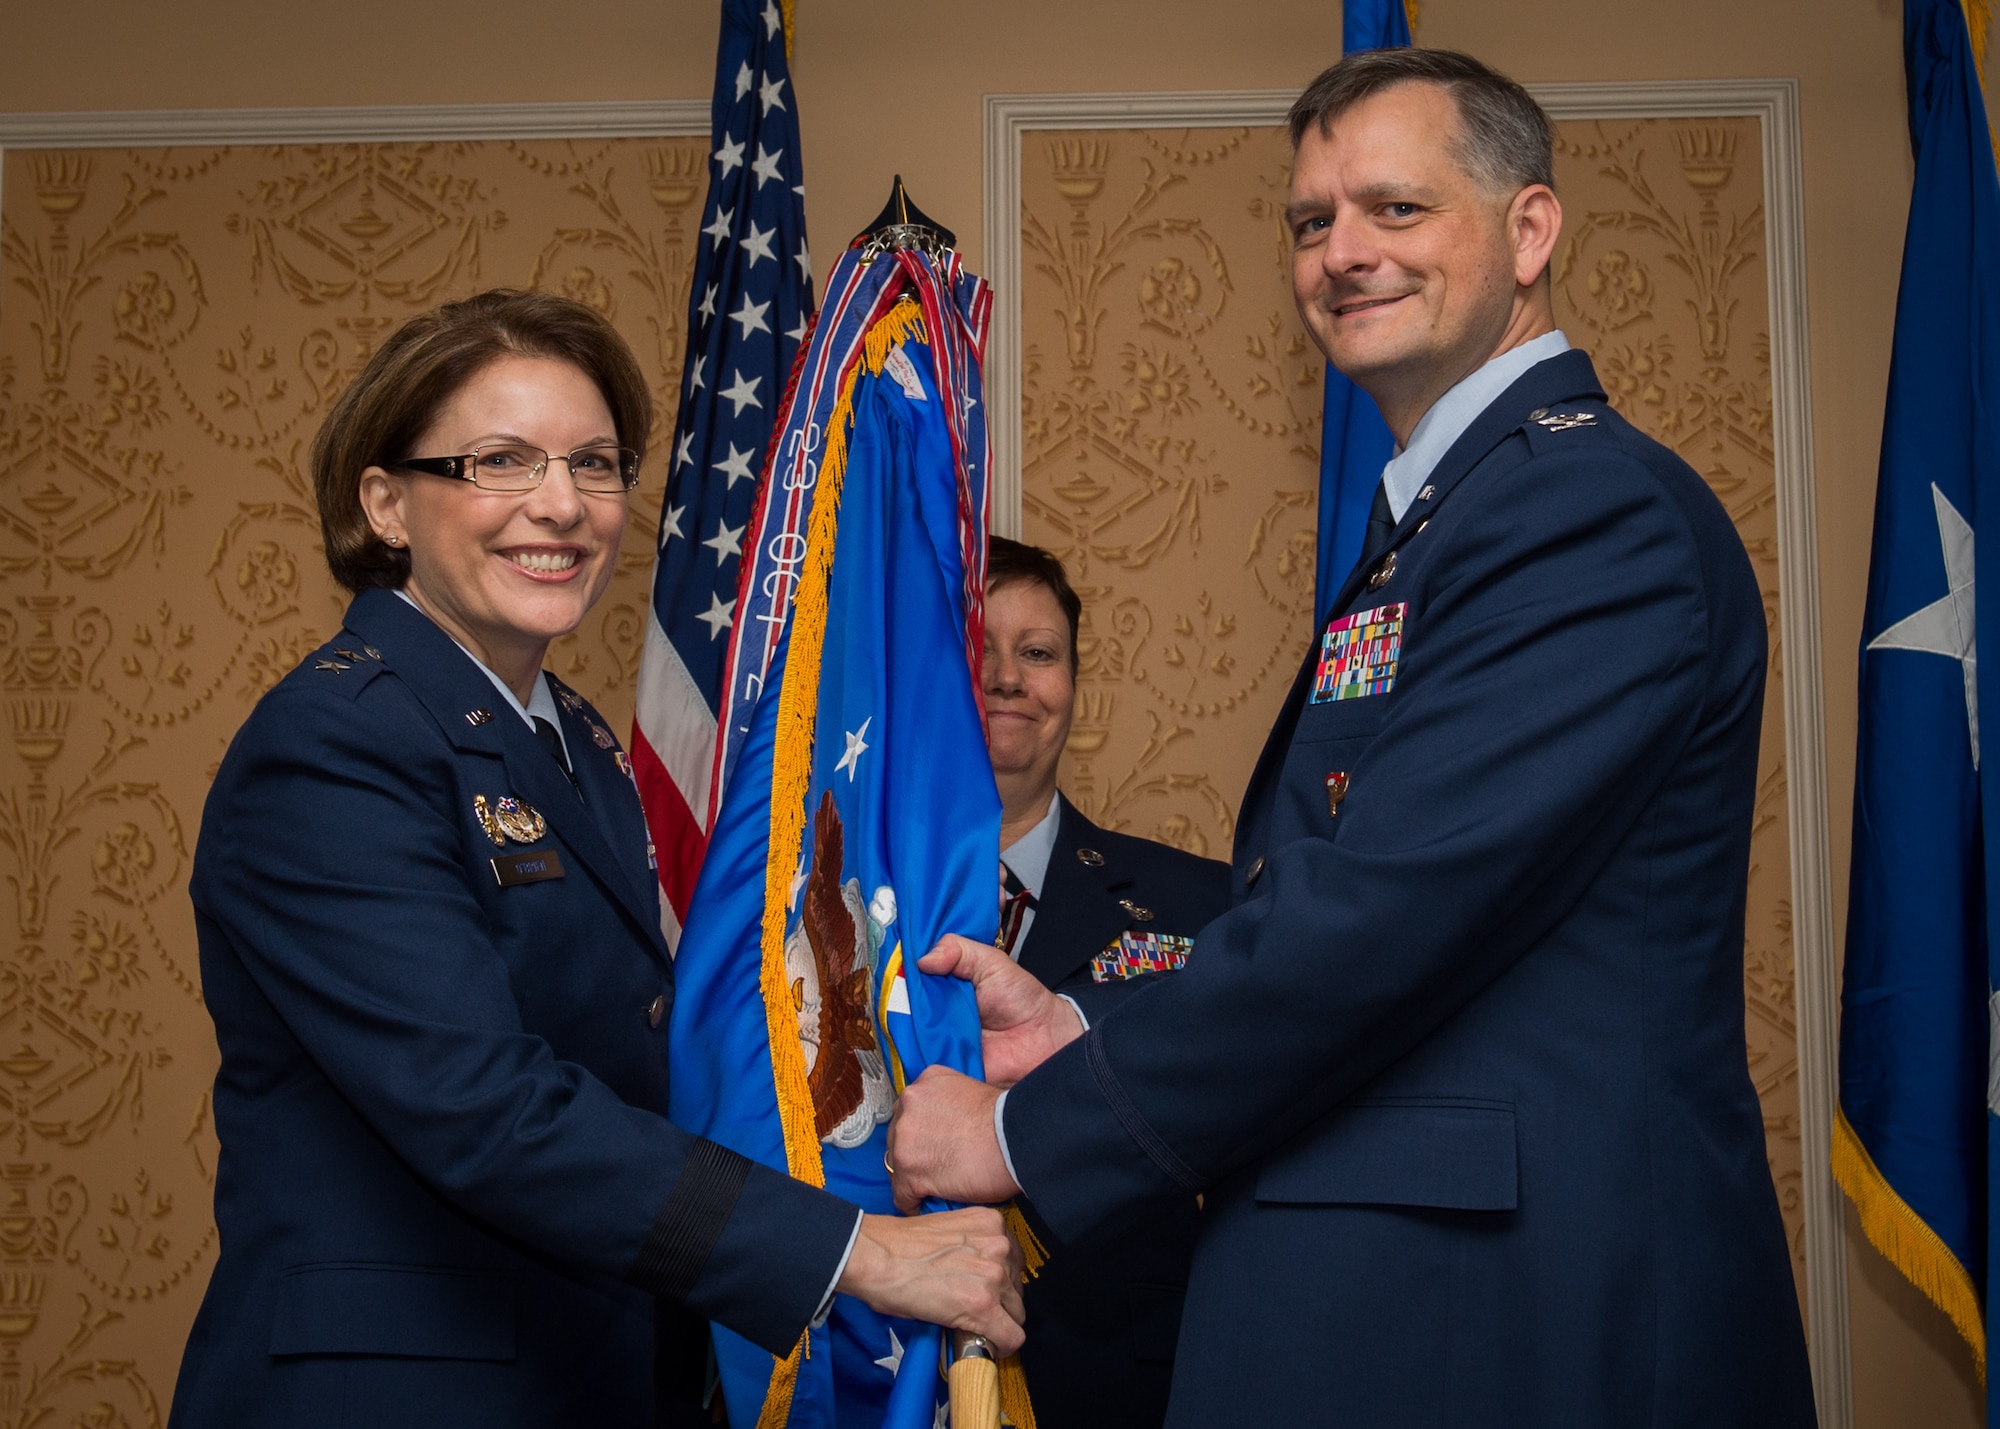 Col. Jonathan C. Rice IV takes command of the 363rd Intelligence, Surveillance and Reconnaissance Wing July 7, 2017. Maj. Gen. Mary F. O’Brien, commander, 25th Air Force, officiated the ceremony at Joint Base Langley-Eustis, Virginia. (U.S. Air Force Photo by Staff Sgt. Areca Bell)